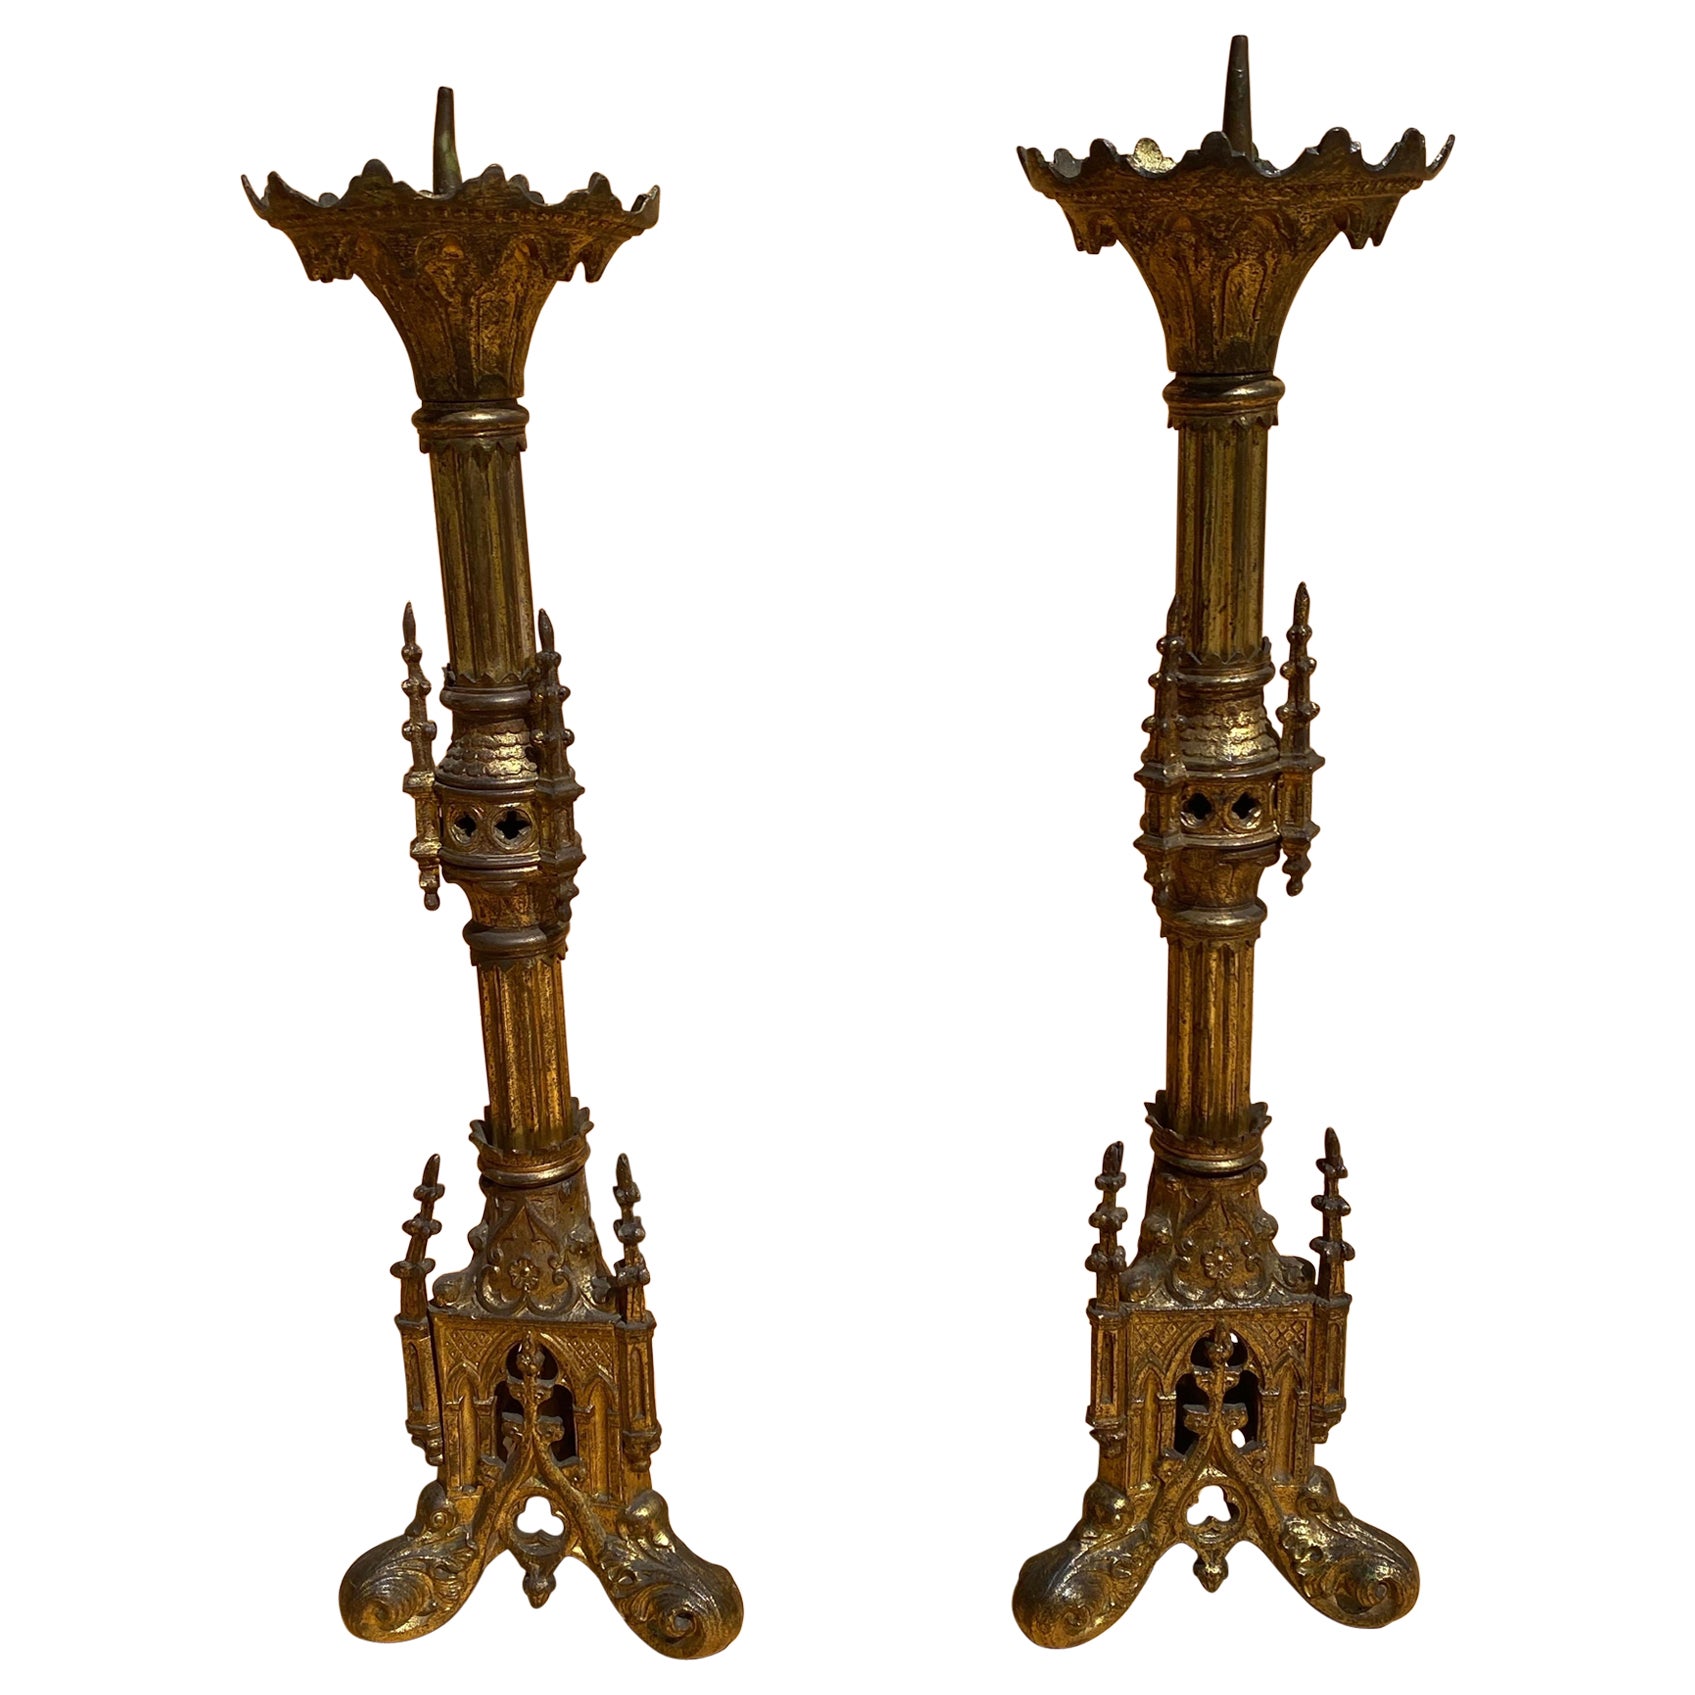 Antique French Neogothic Altar Torchère Candlestick Set w/ Architectural Element